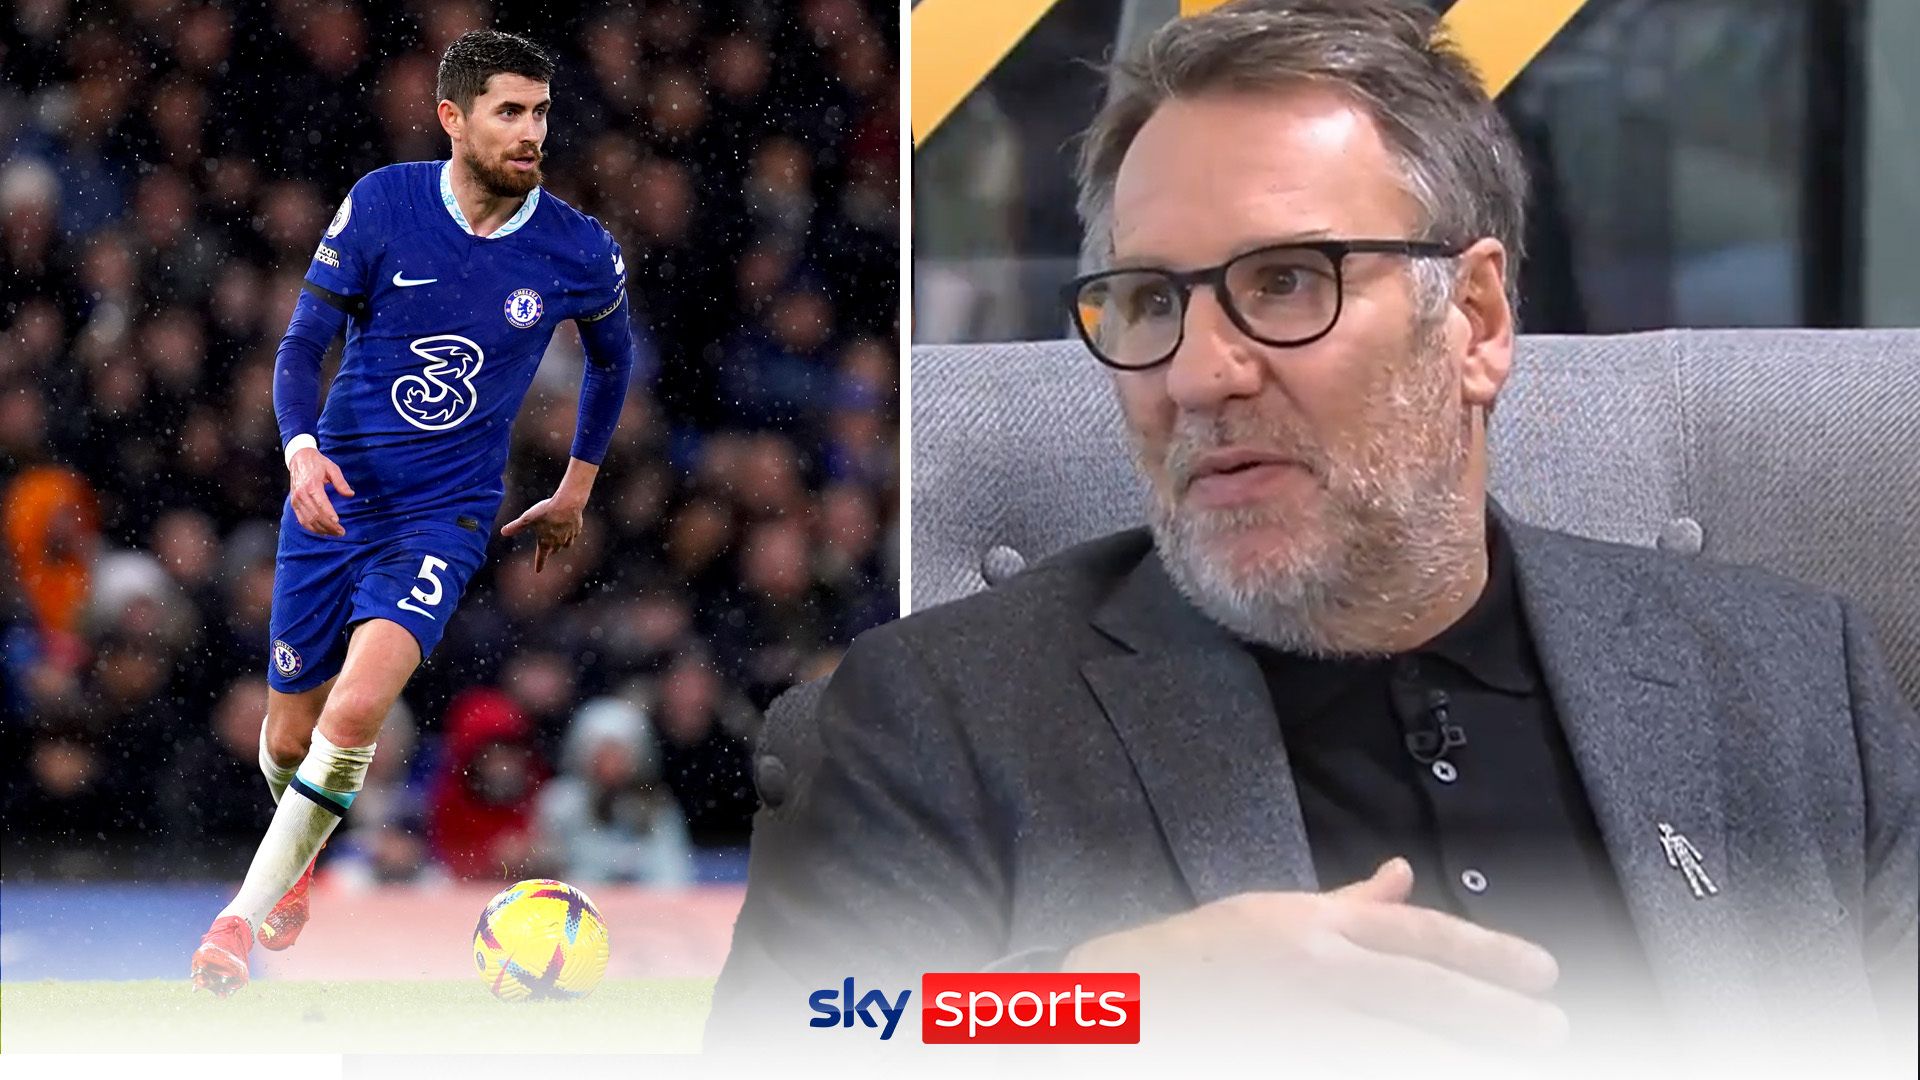 'Outstanding, a top signing' | Merson reacts to Jorginho's potential Arsenal move